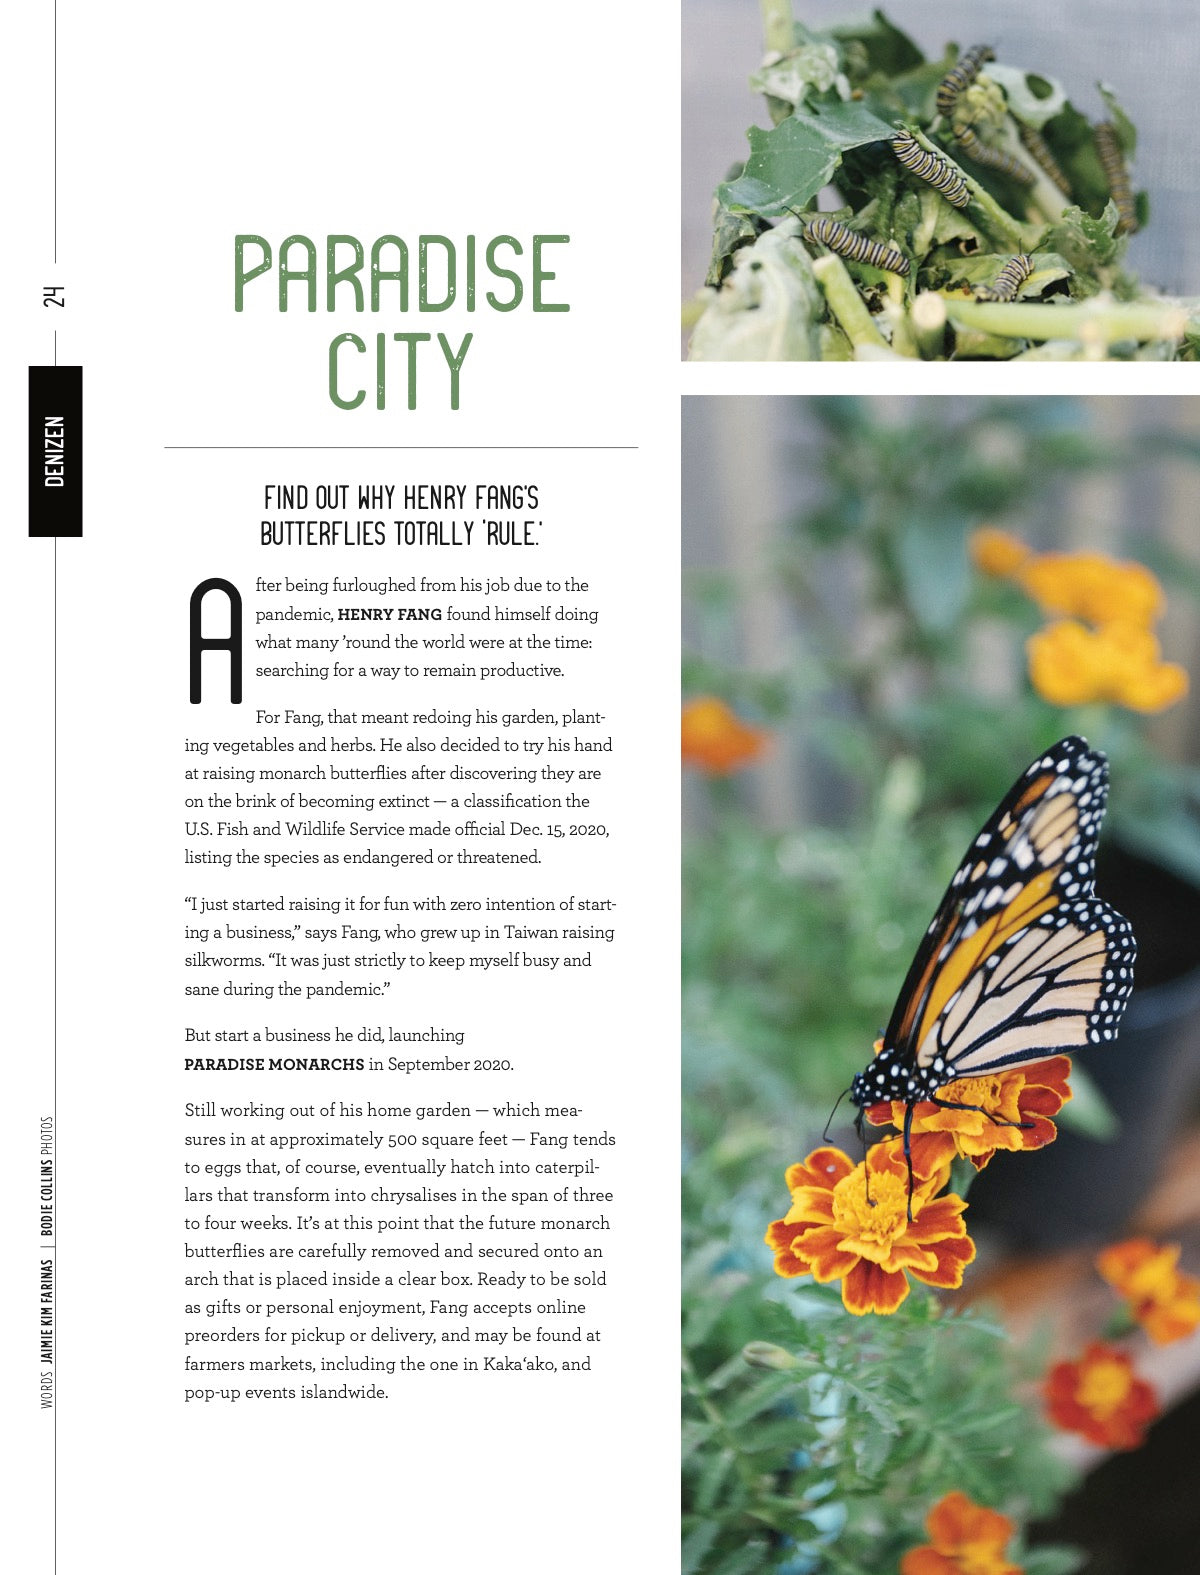 article feature in Kakaako vert magazine. A Hawaii's local publication based in Ward, Kakaako, Honolulu, Oahu, Hawaii. It's a local lifestyle and business magazine. 